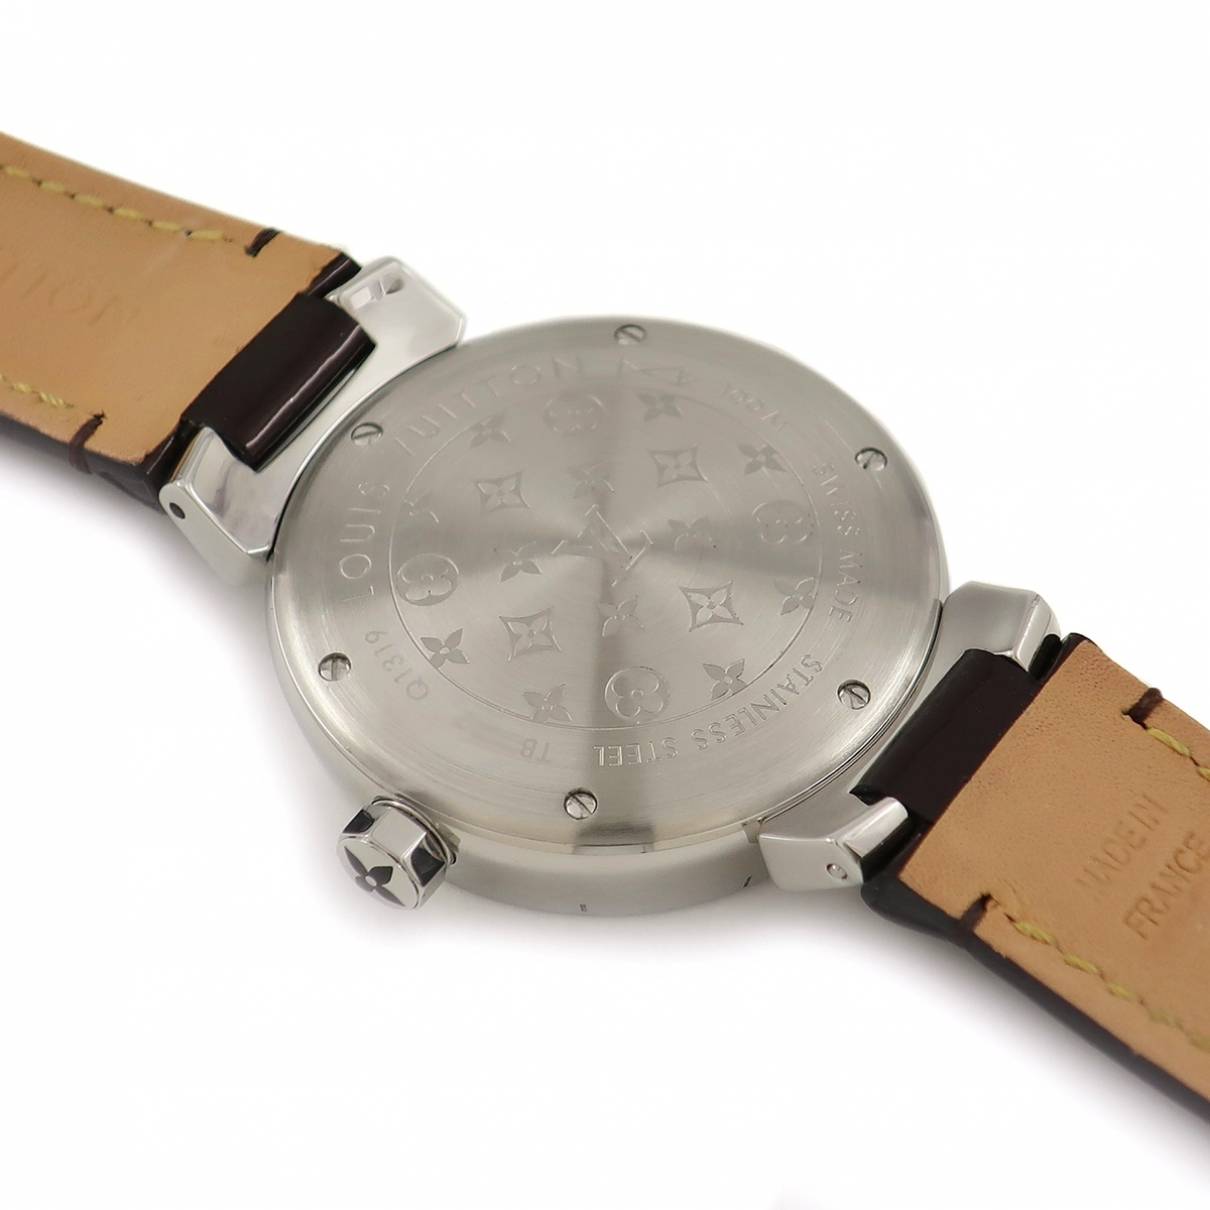 Louis Vuitton Tambour Rose Gold – W1PG10 – 61,100 USD – The Watch Pages